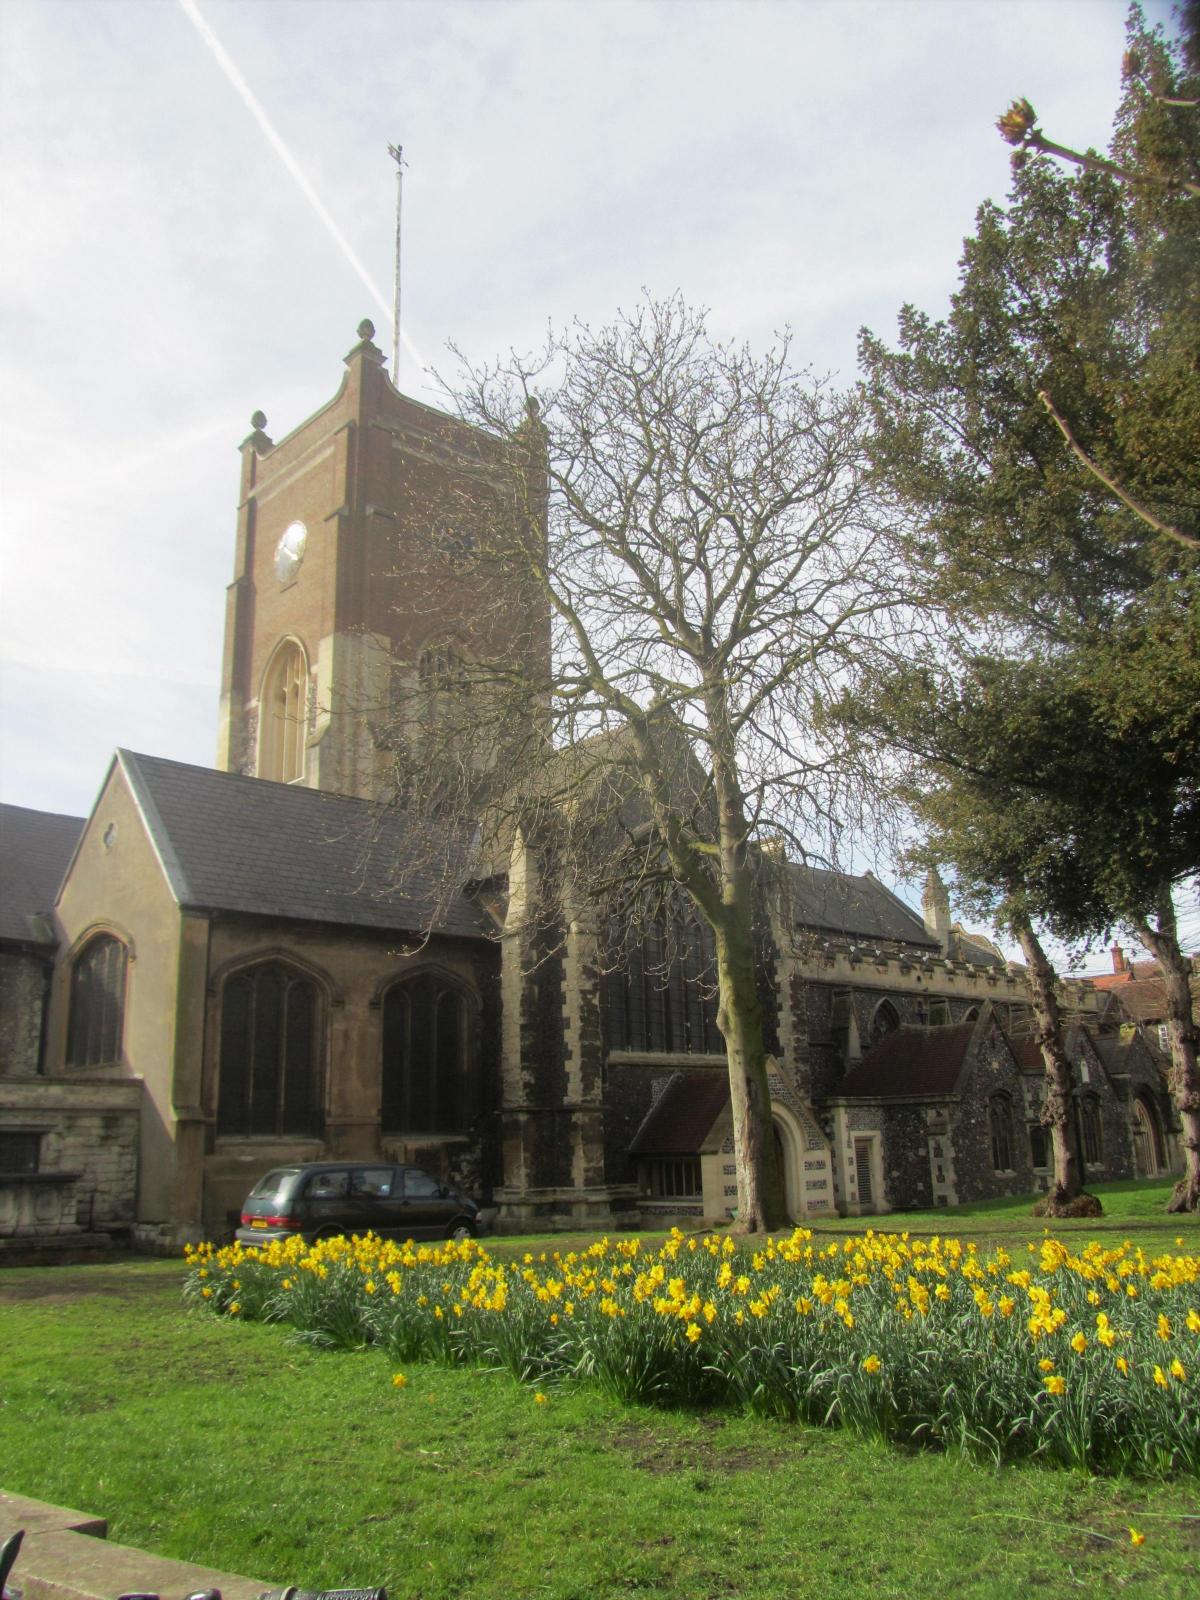 Paul Flavell took this photo of All Saints Church in Kingston in the spring sunshine last week